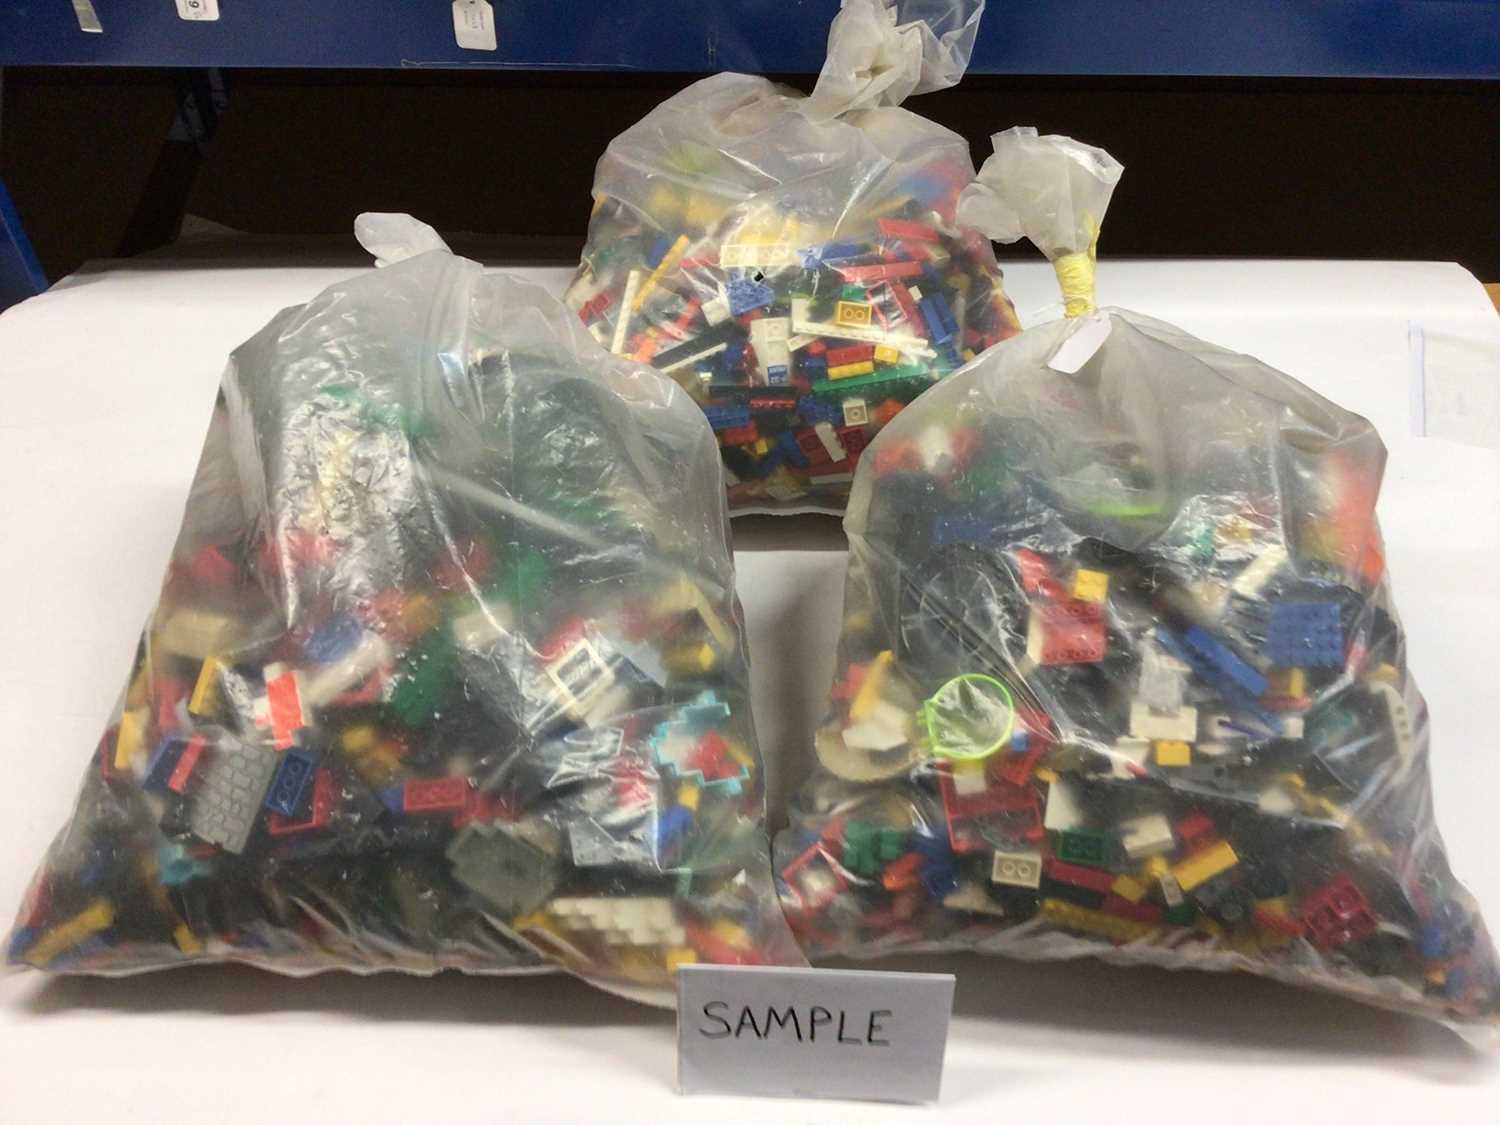 Lot 87 - Three bags of assorted mixed Lego bricks and accessories, weighing approx 15 Kg in total